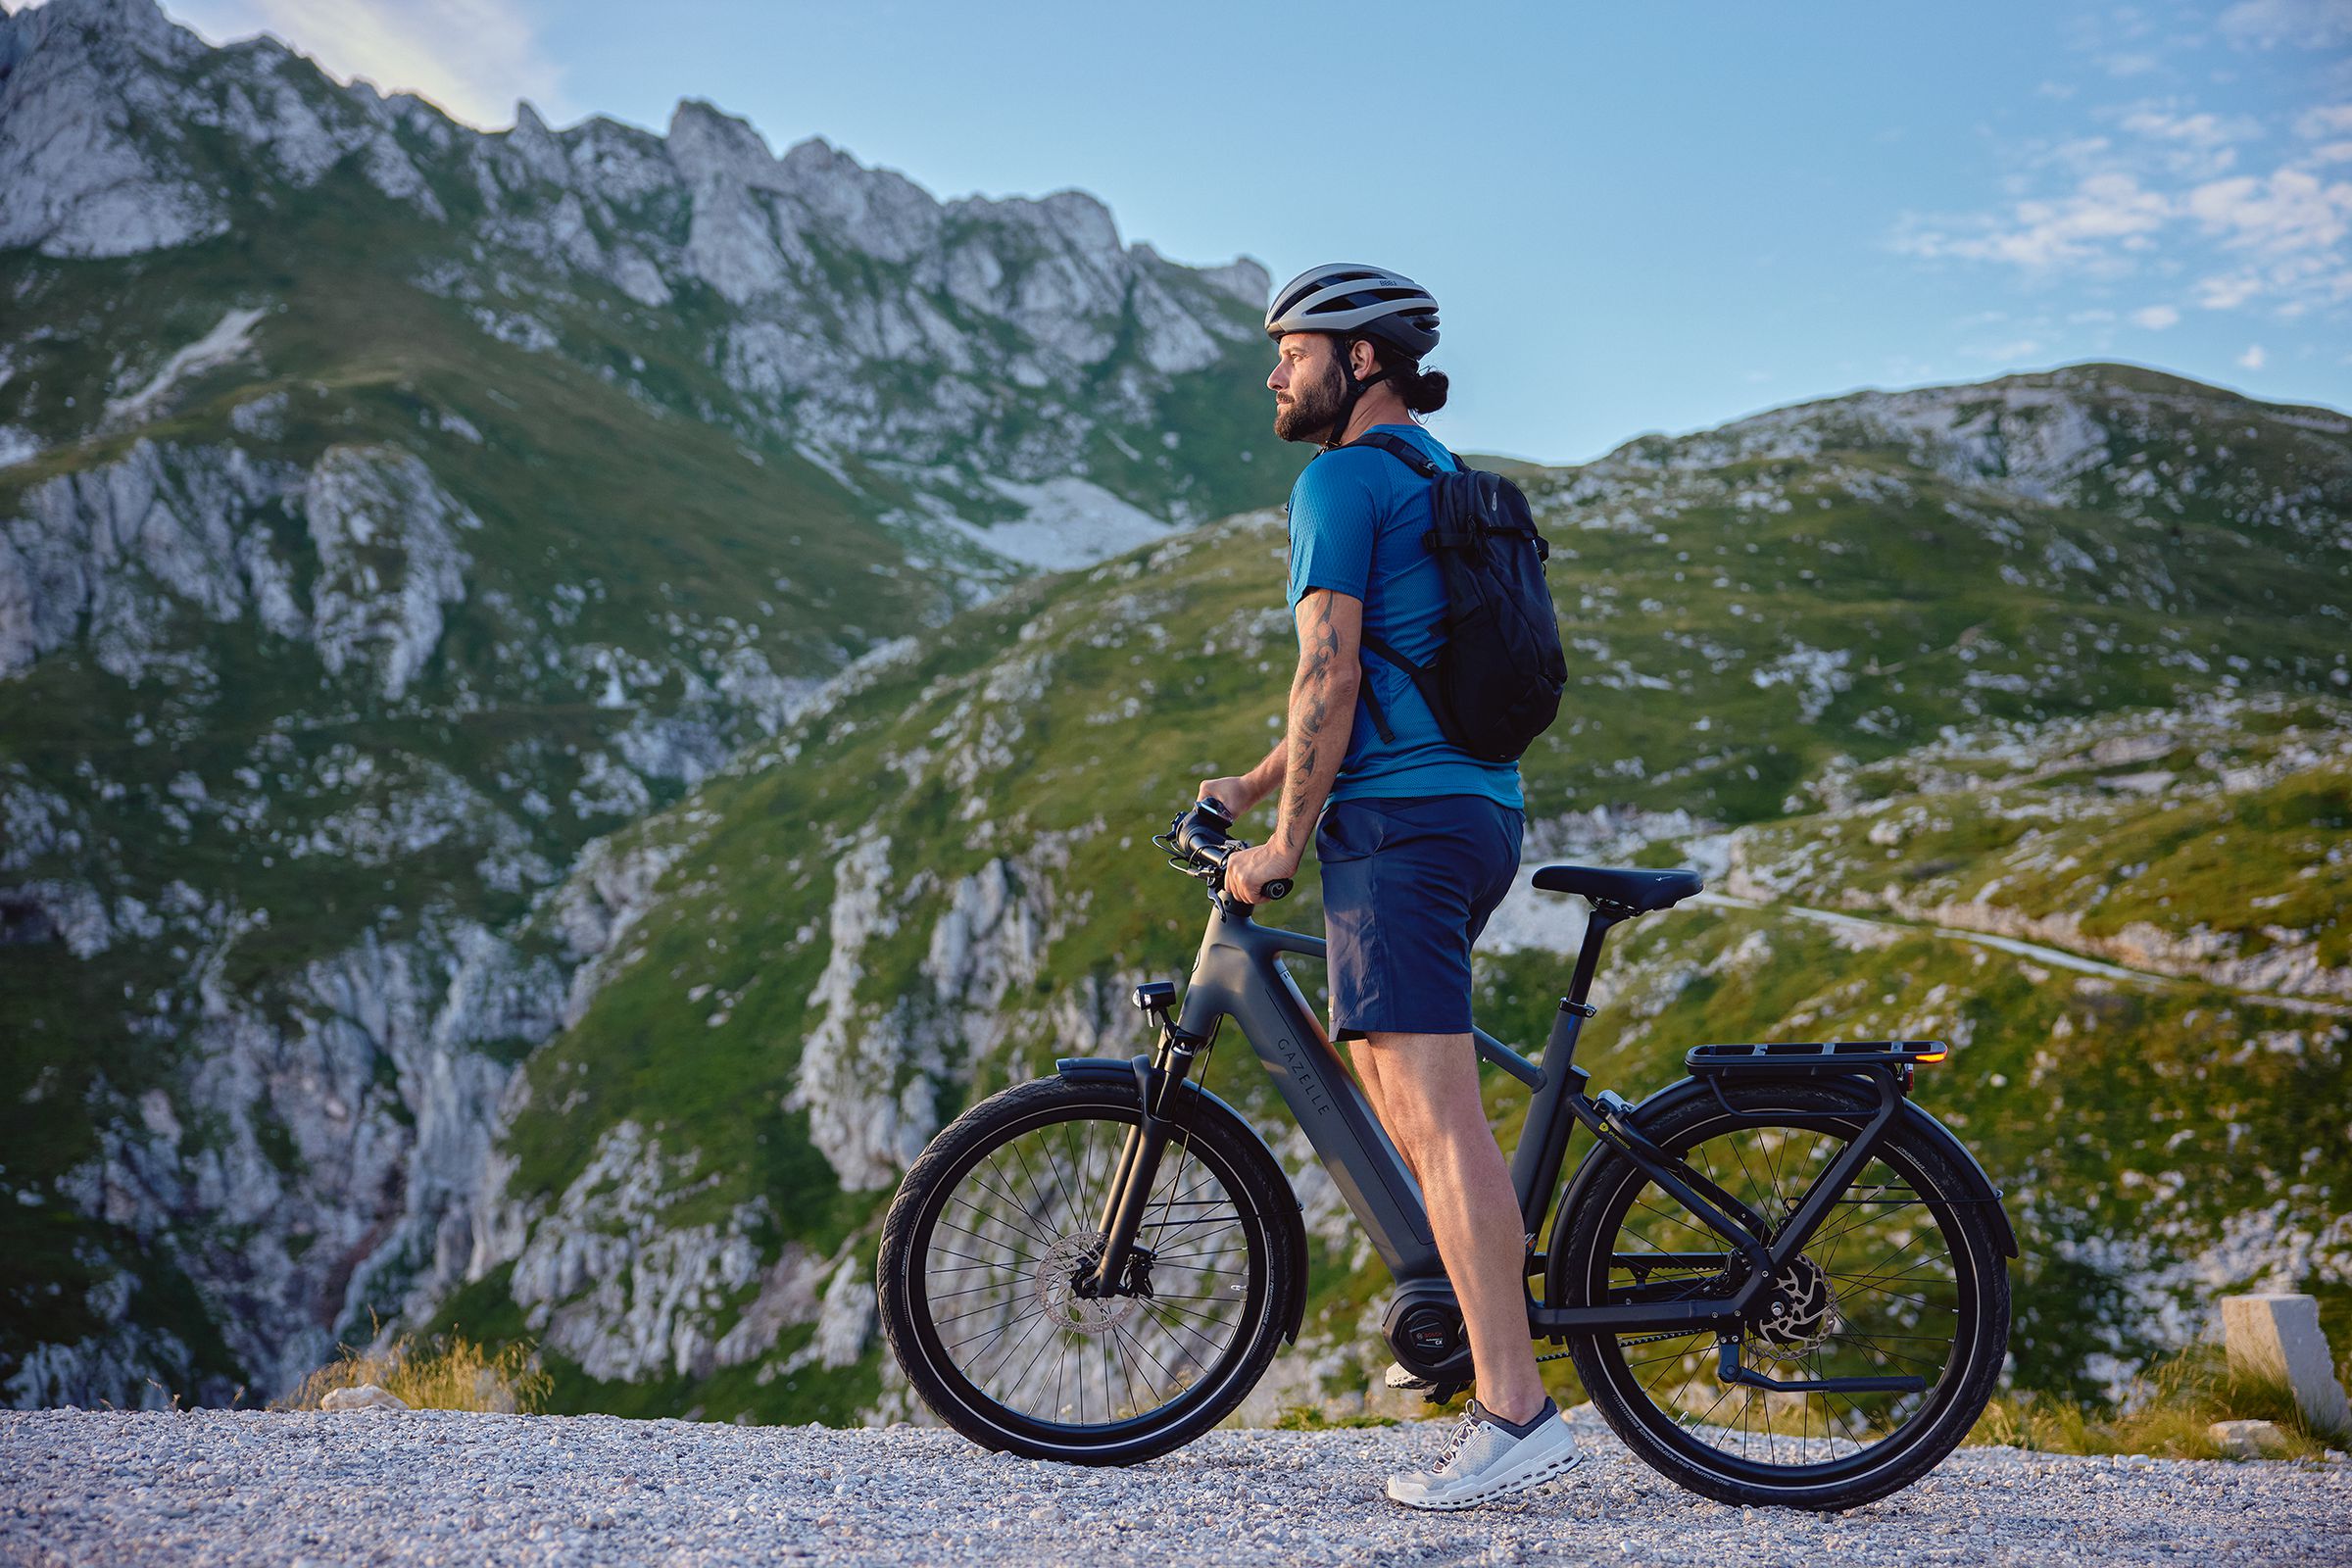 A man straddles his Gazelle e-bike while looking down the road ahead as a snow-capped mountain cap looms in the distance.